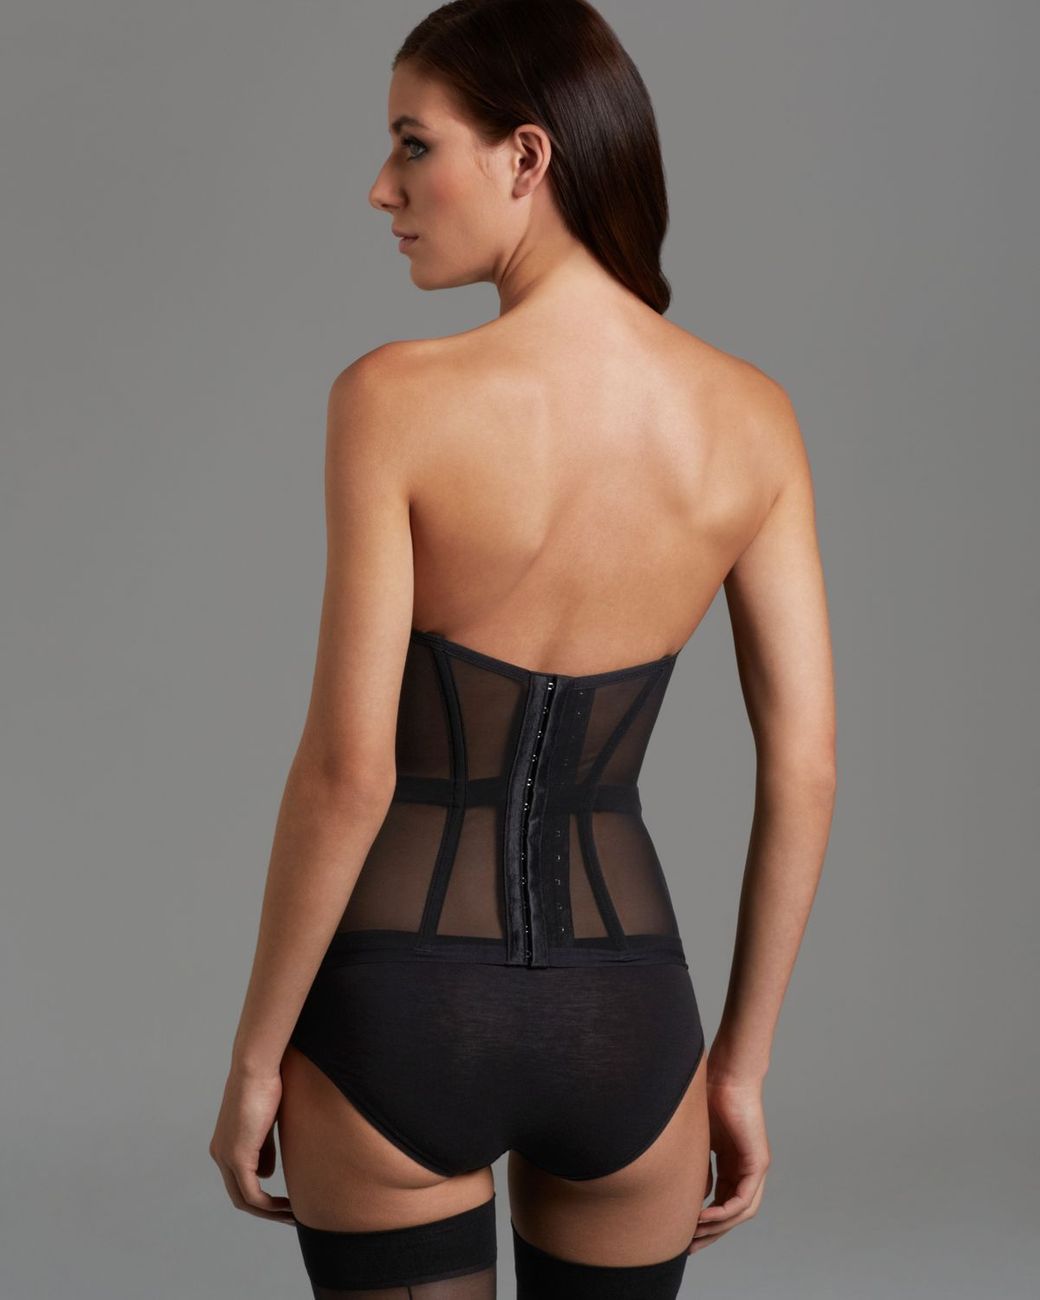 Corsets & Suspenders in Black Womens Clothing Lingerie Corsets and bustier tops La Perla Lace Bustiers 